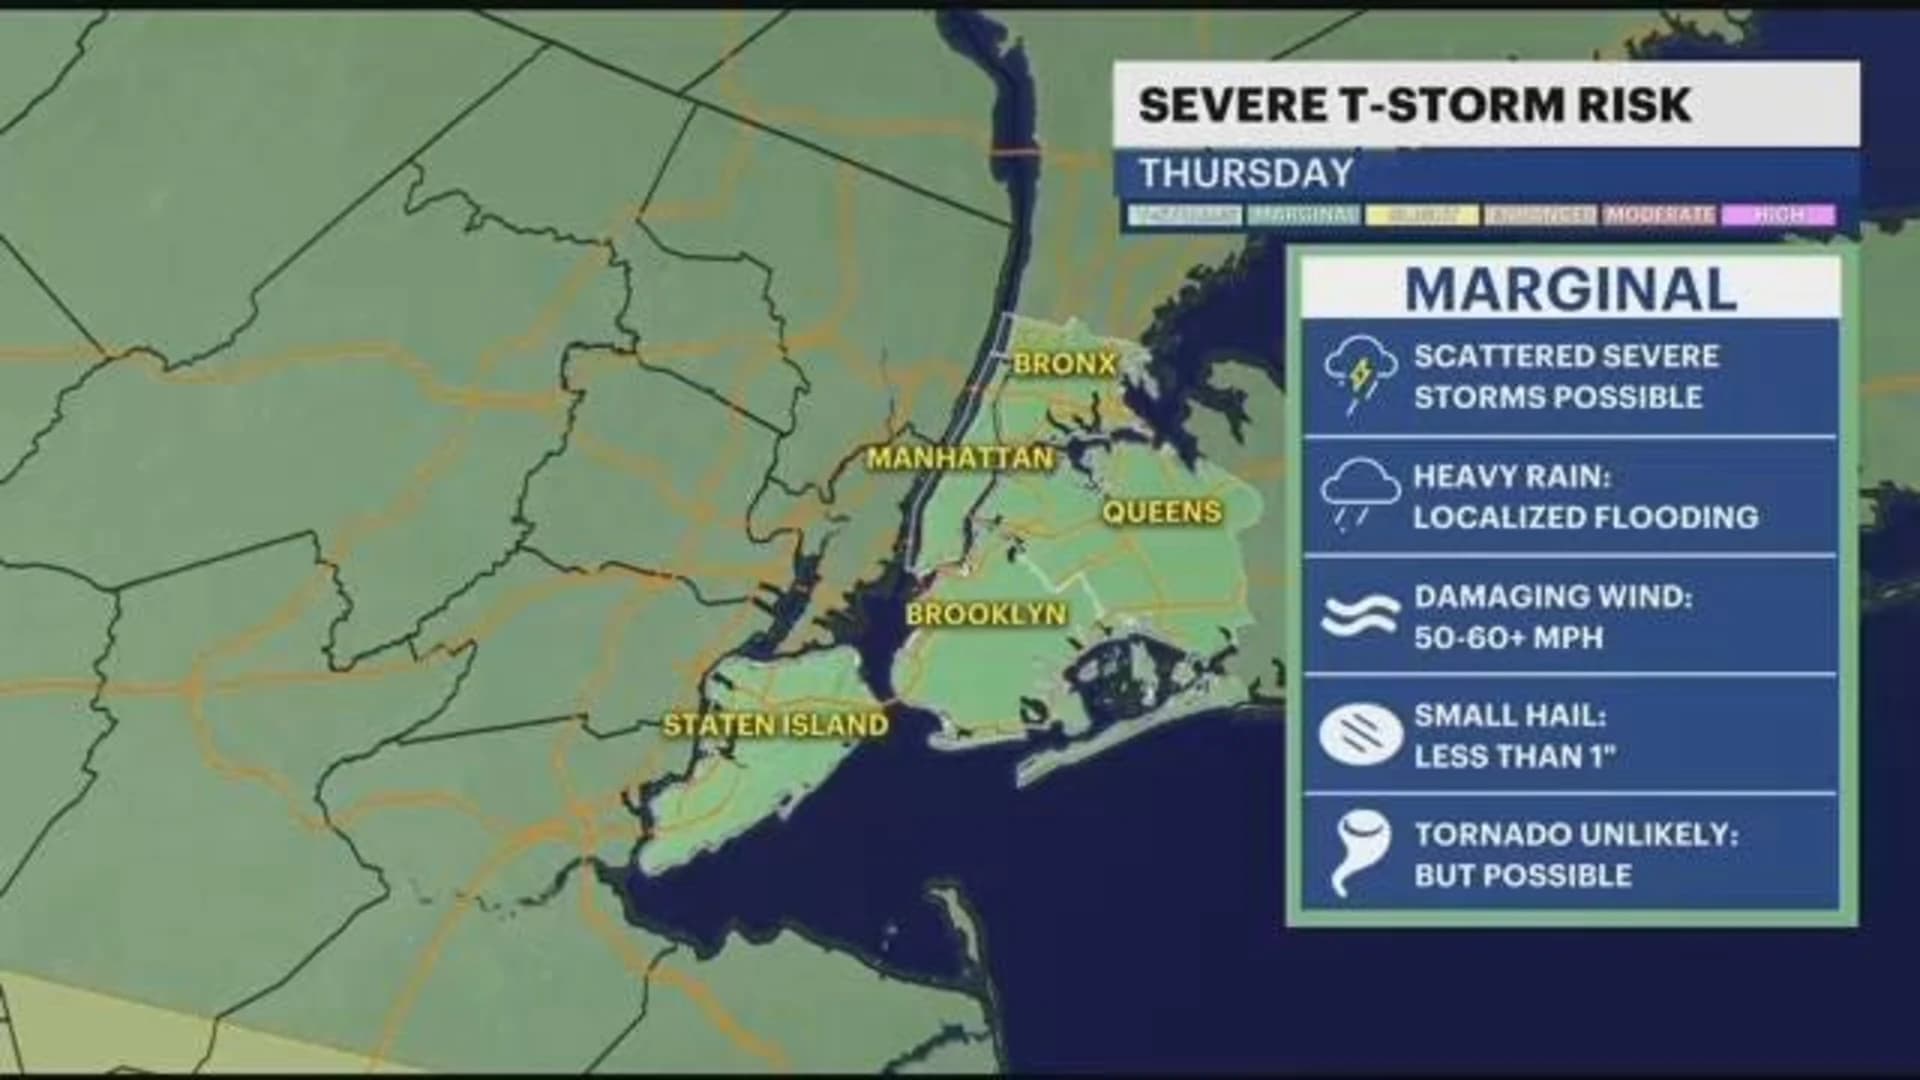 Severe thunderstorms expected Thursday evening across NYC